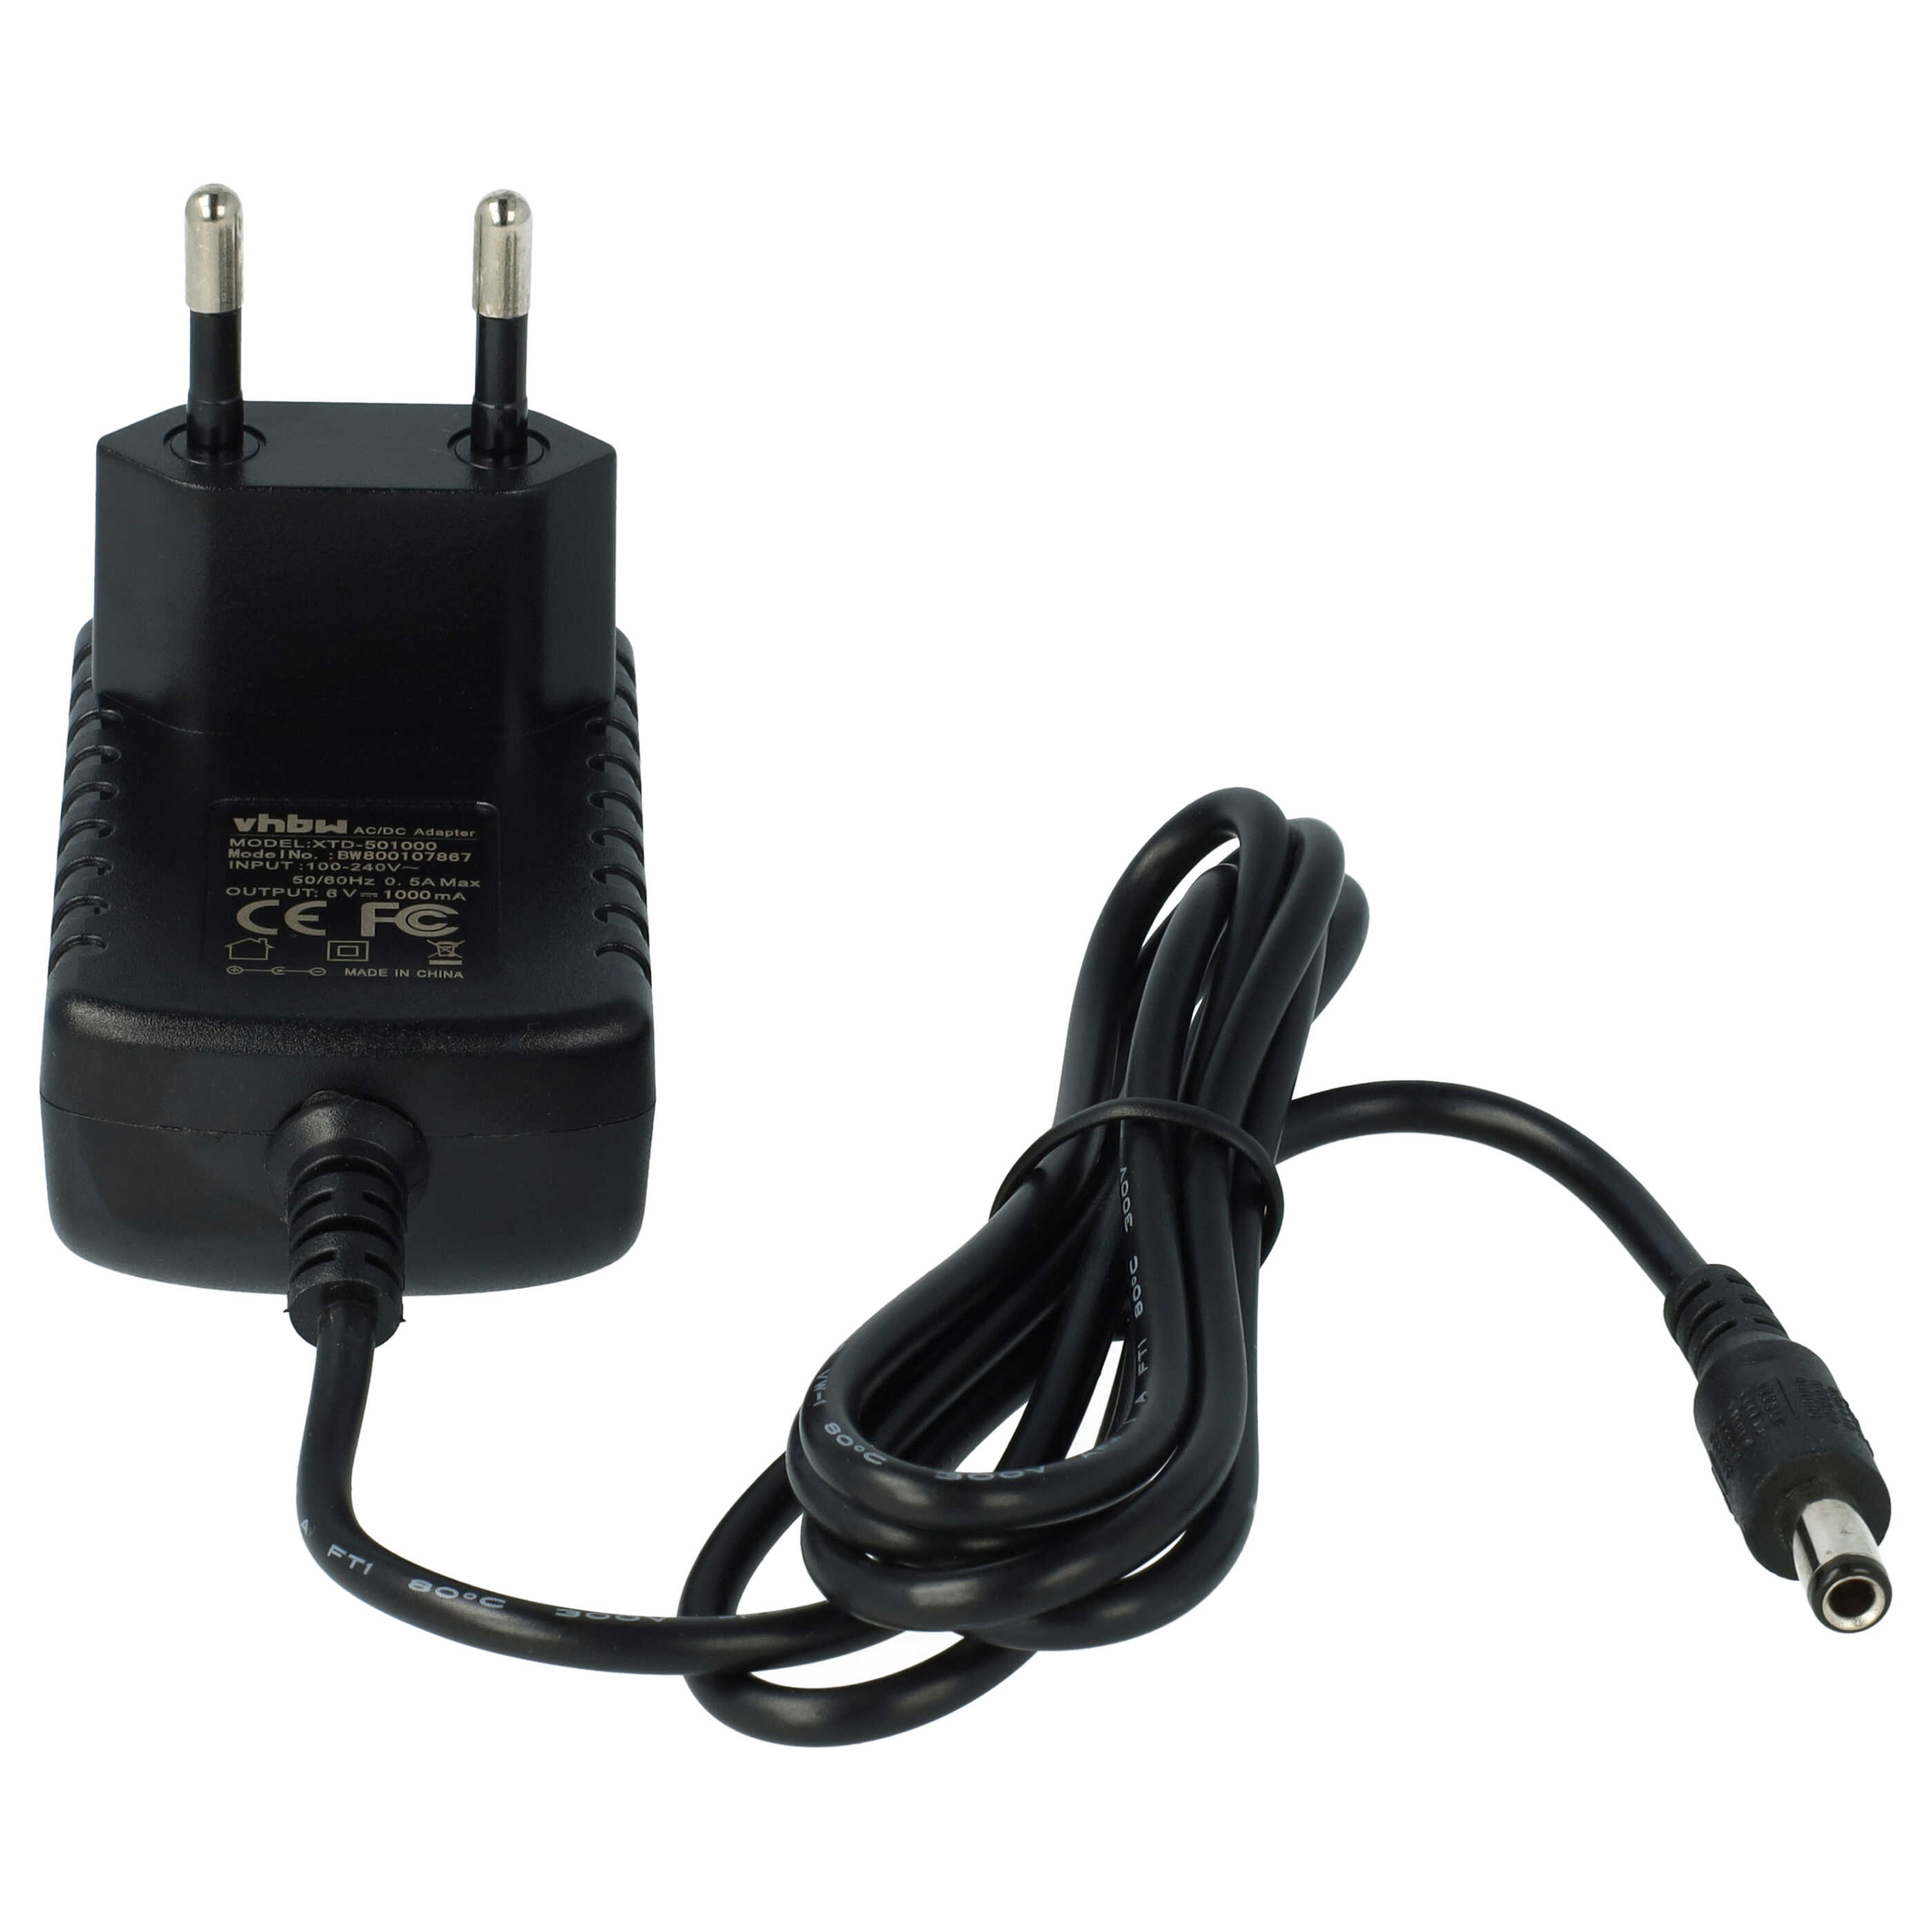 Power Adapter replaces Uebe type A, SW06-060E, PZN-03558547 for UebeBlood Pressure Monitor - 110 cm